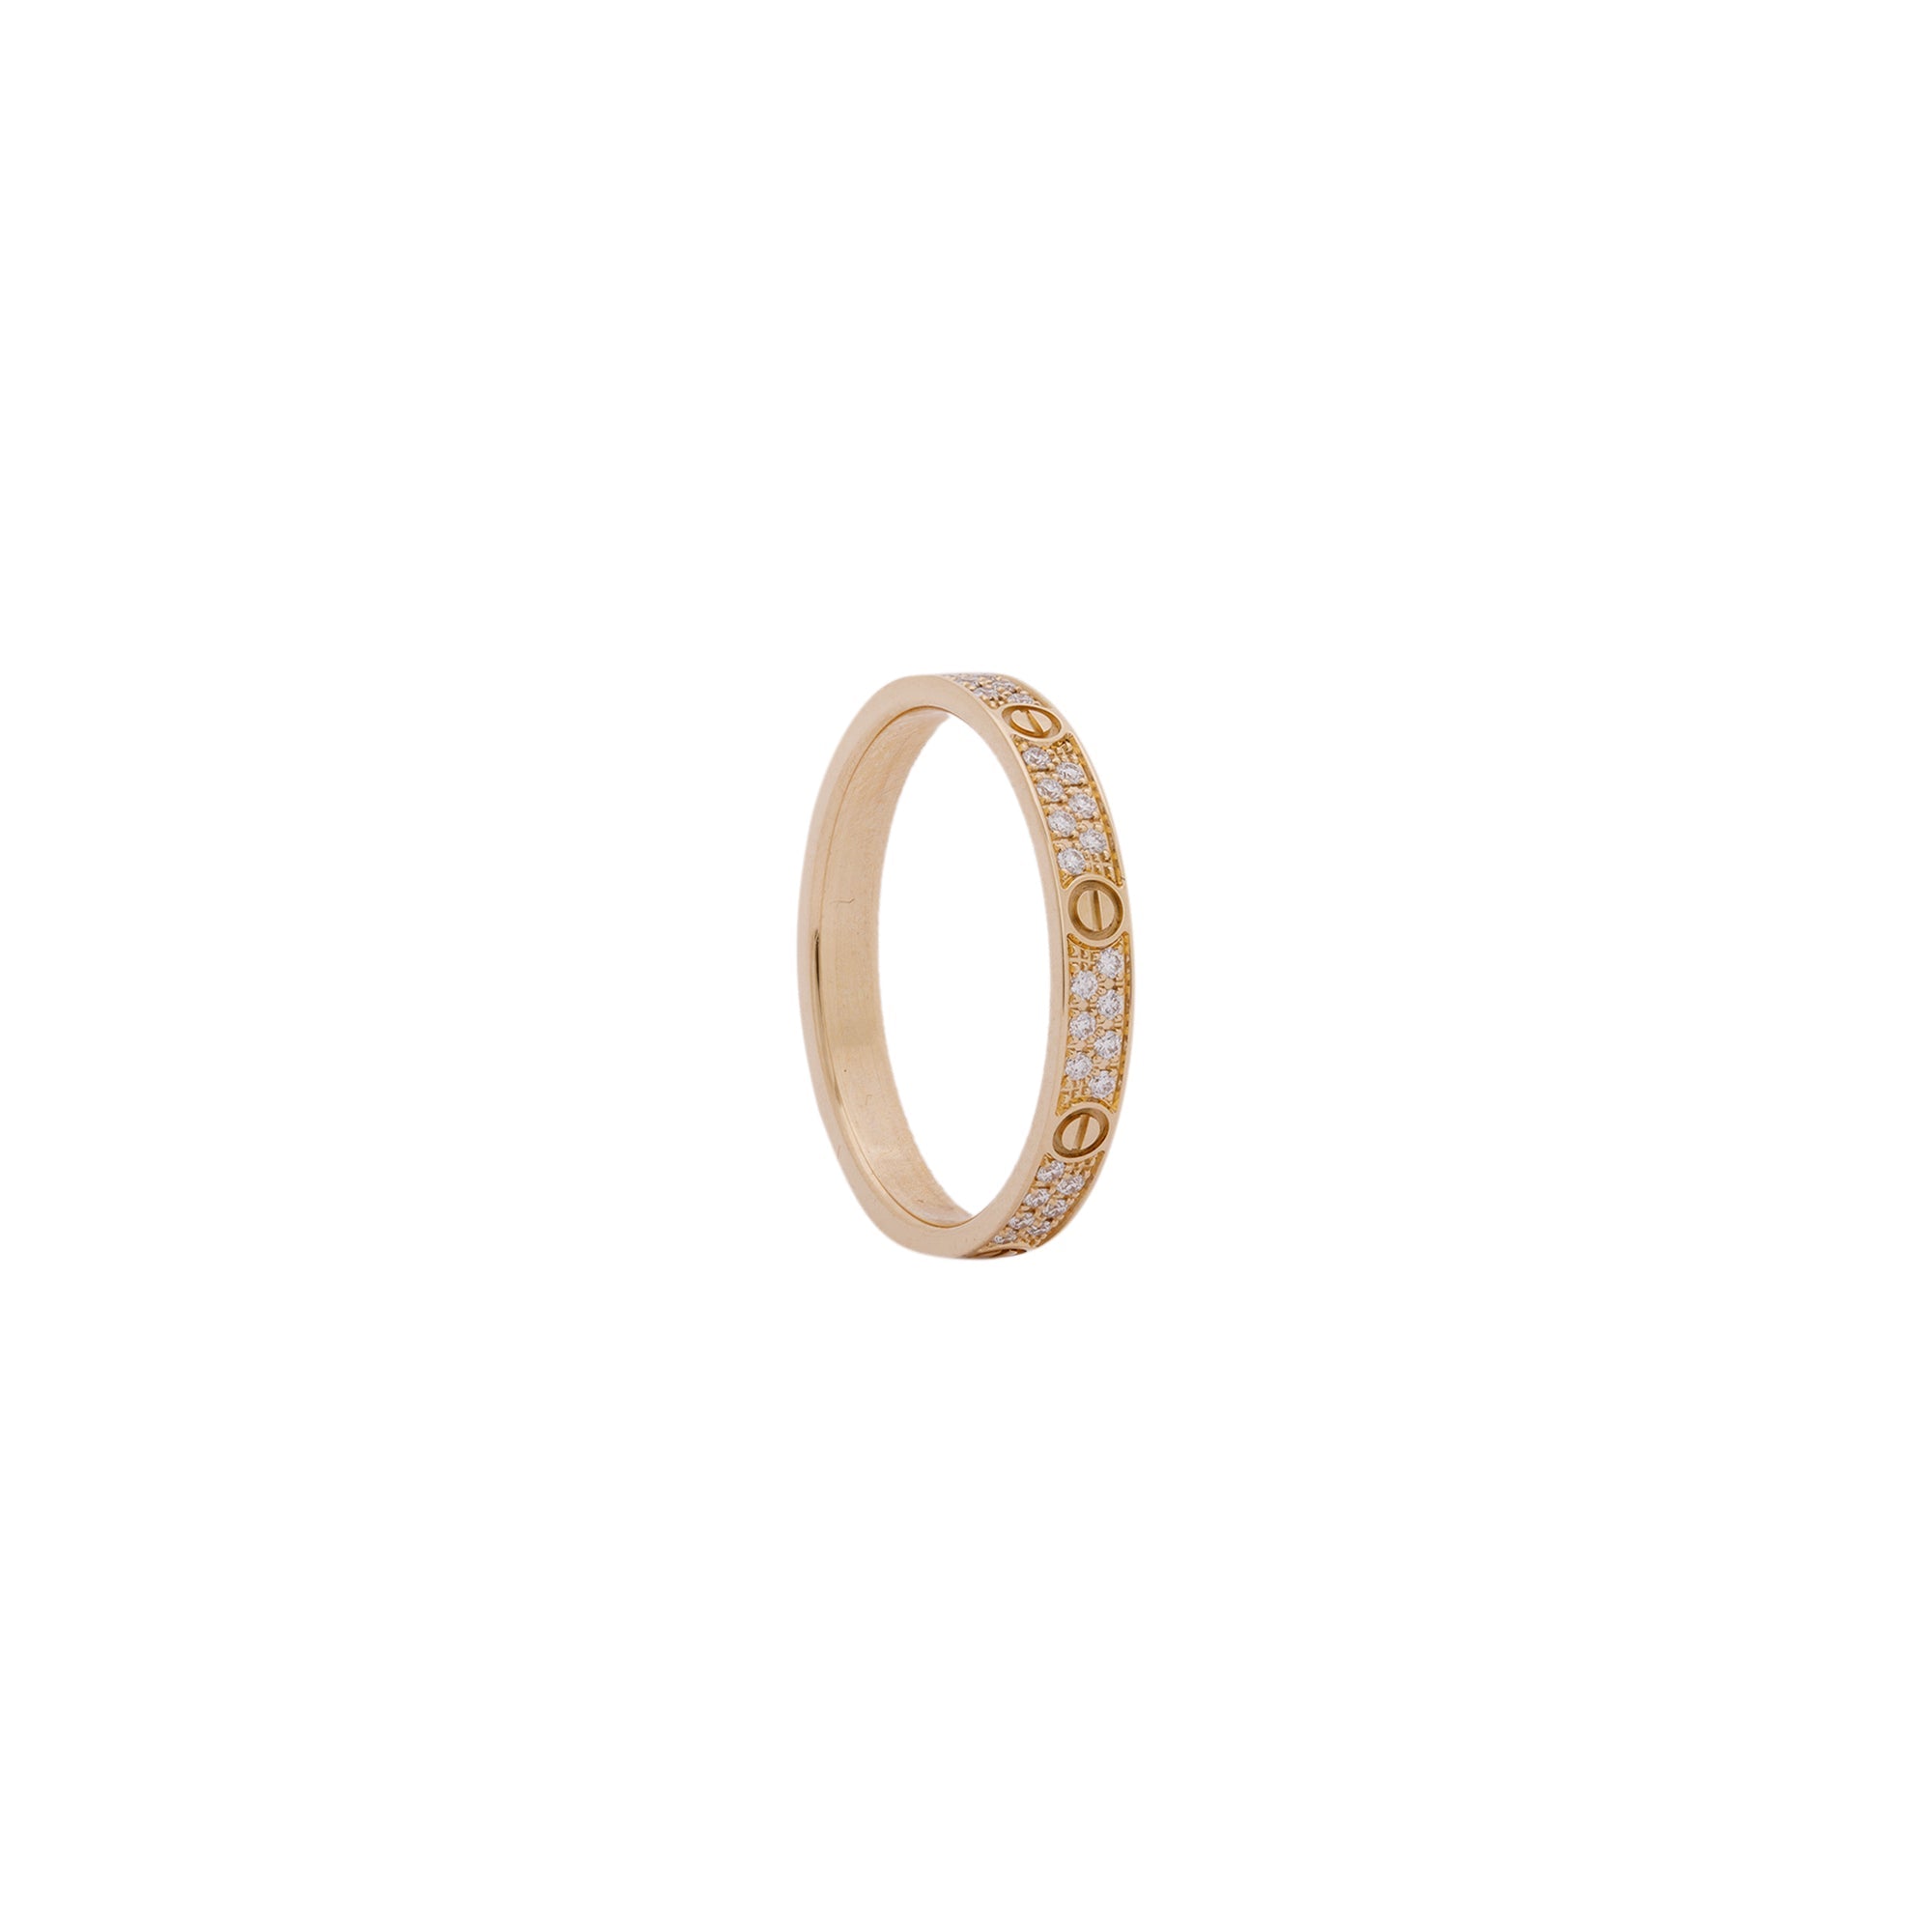 Cartier 18k Yellow Gold Pave Diamond Love Ring, Small Model w/ Box, Re ...